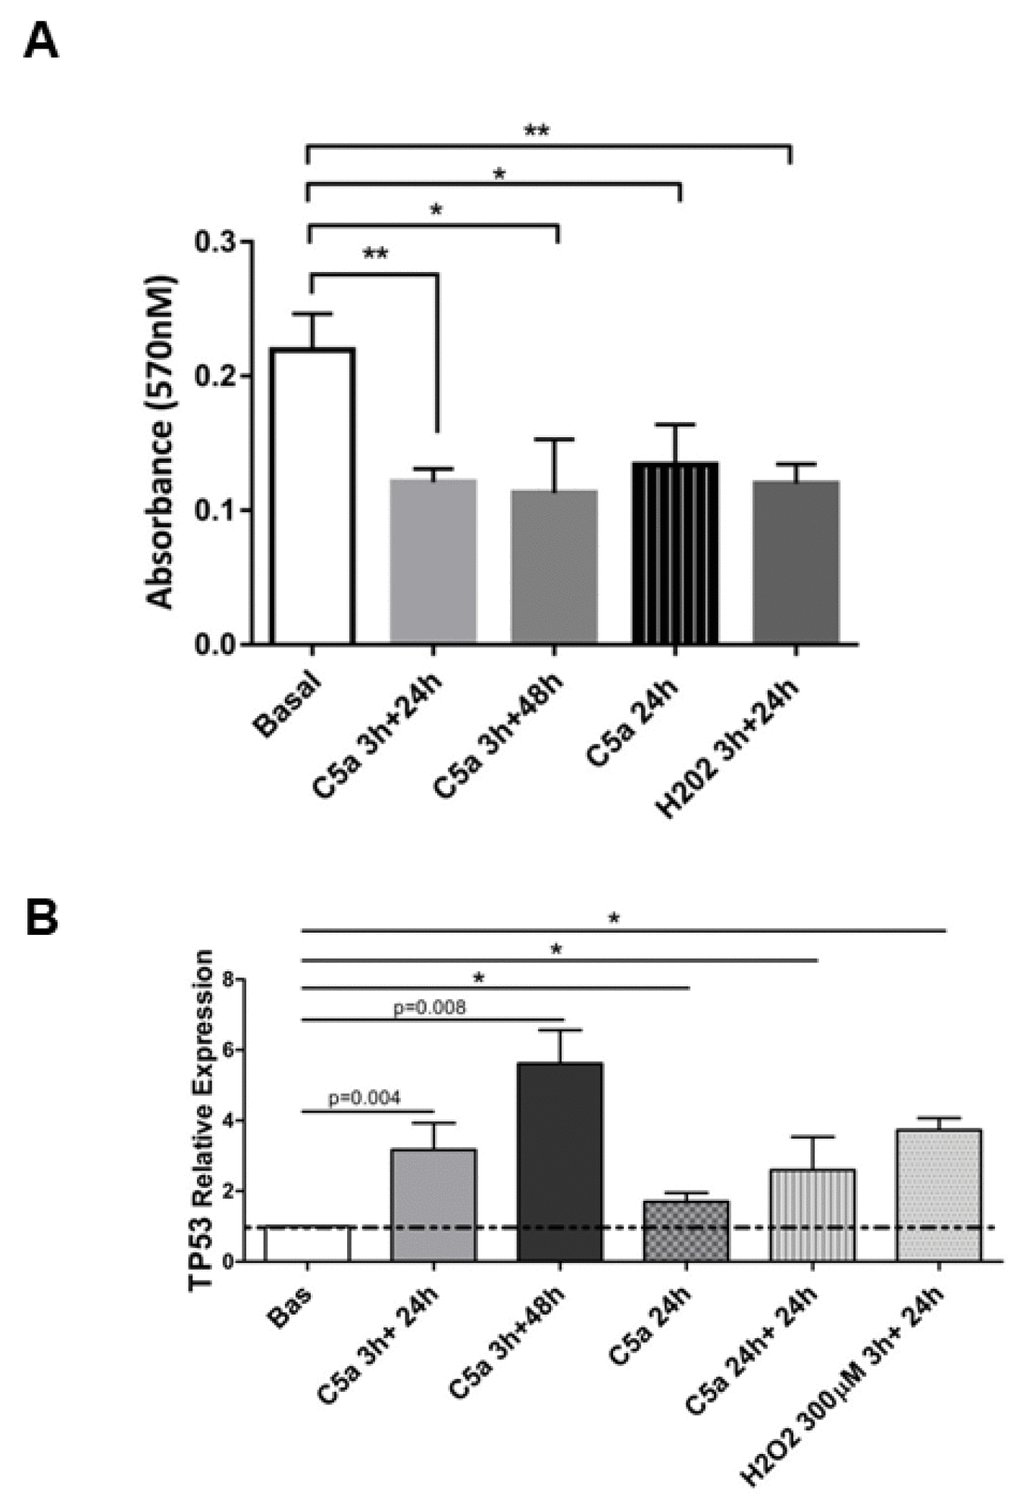 Altered cell proliferation and p53 expression after C5a exposure in RTEC. (A) MTT assay of RTEC in logarithmic growth phase treated with the same dosage of C5a showed an inhibition of cell proliferation. (B) TP53 gene expression level in C5a stimulated RTEC. Data are expressed as the mean ± SD (*p